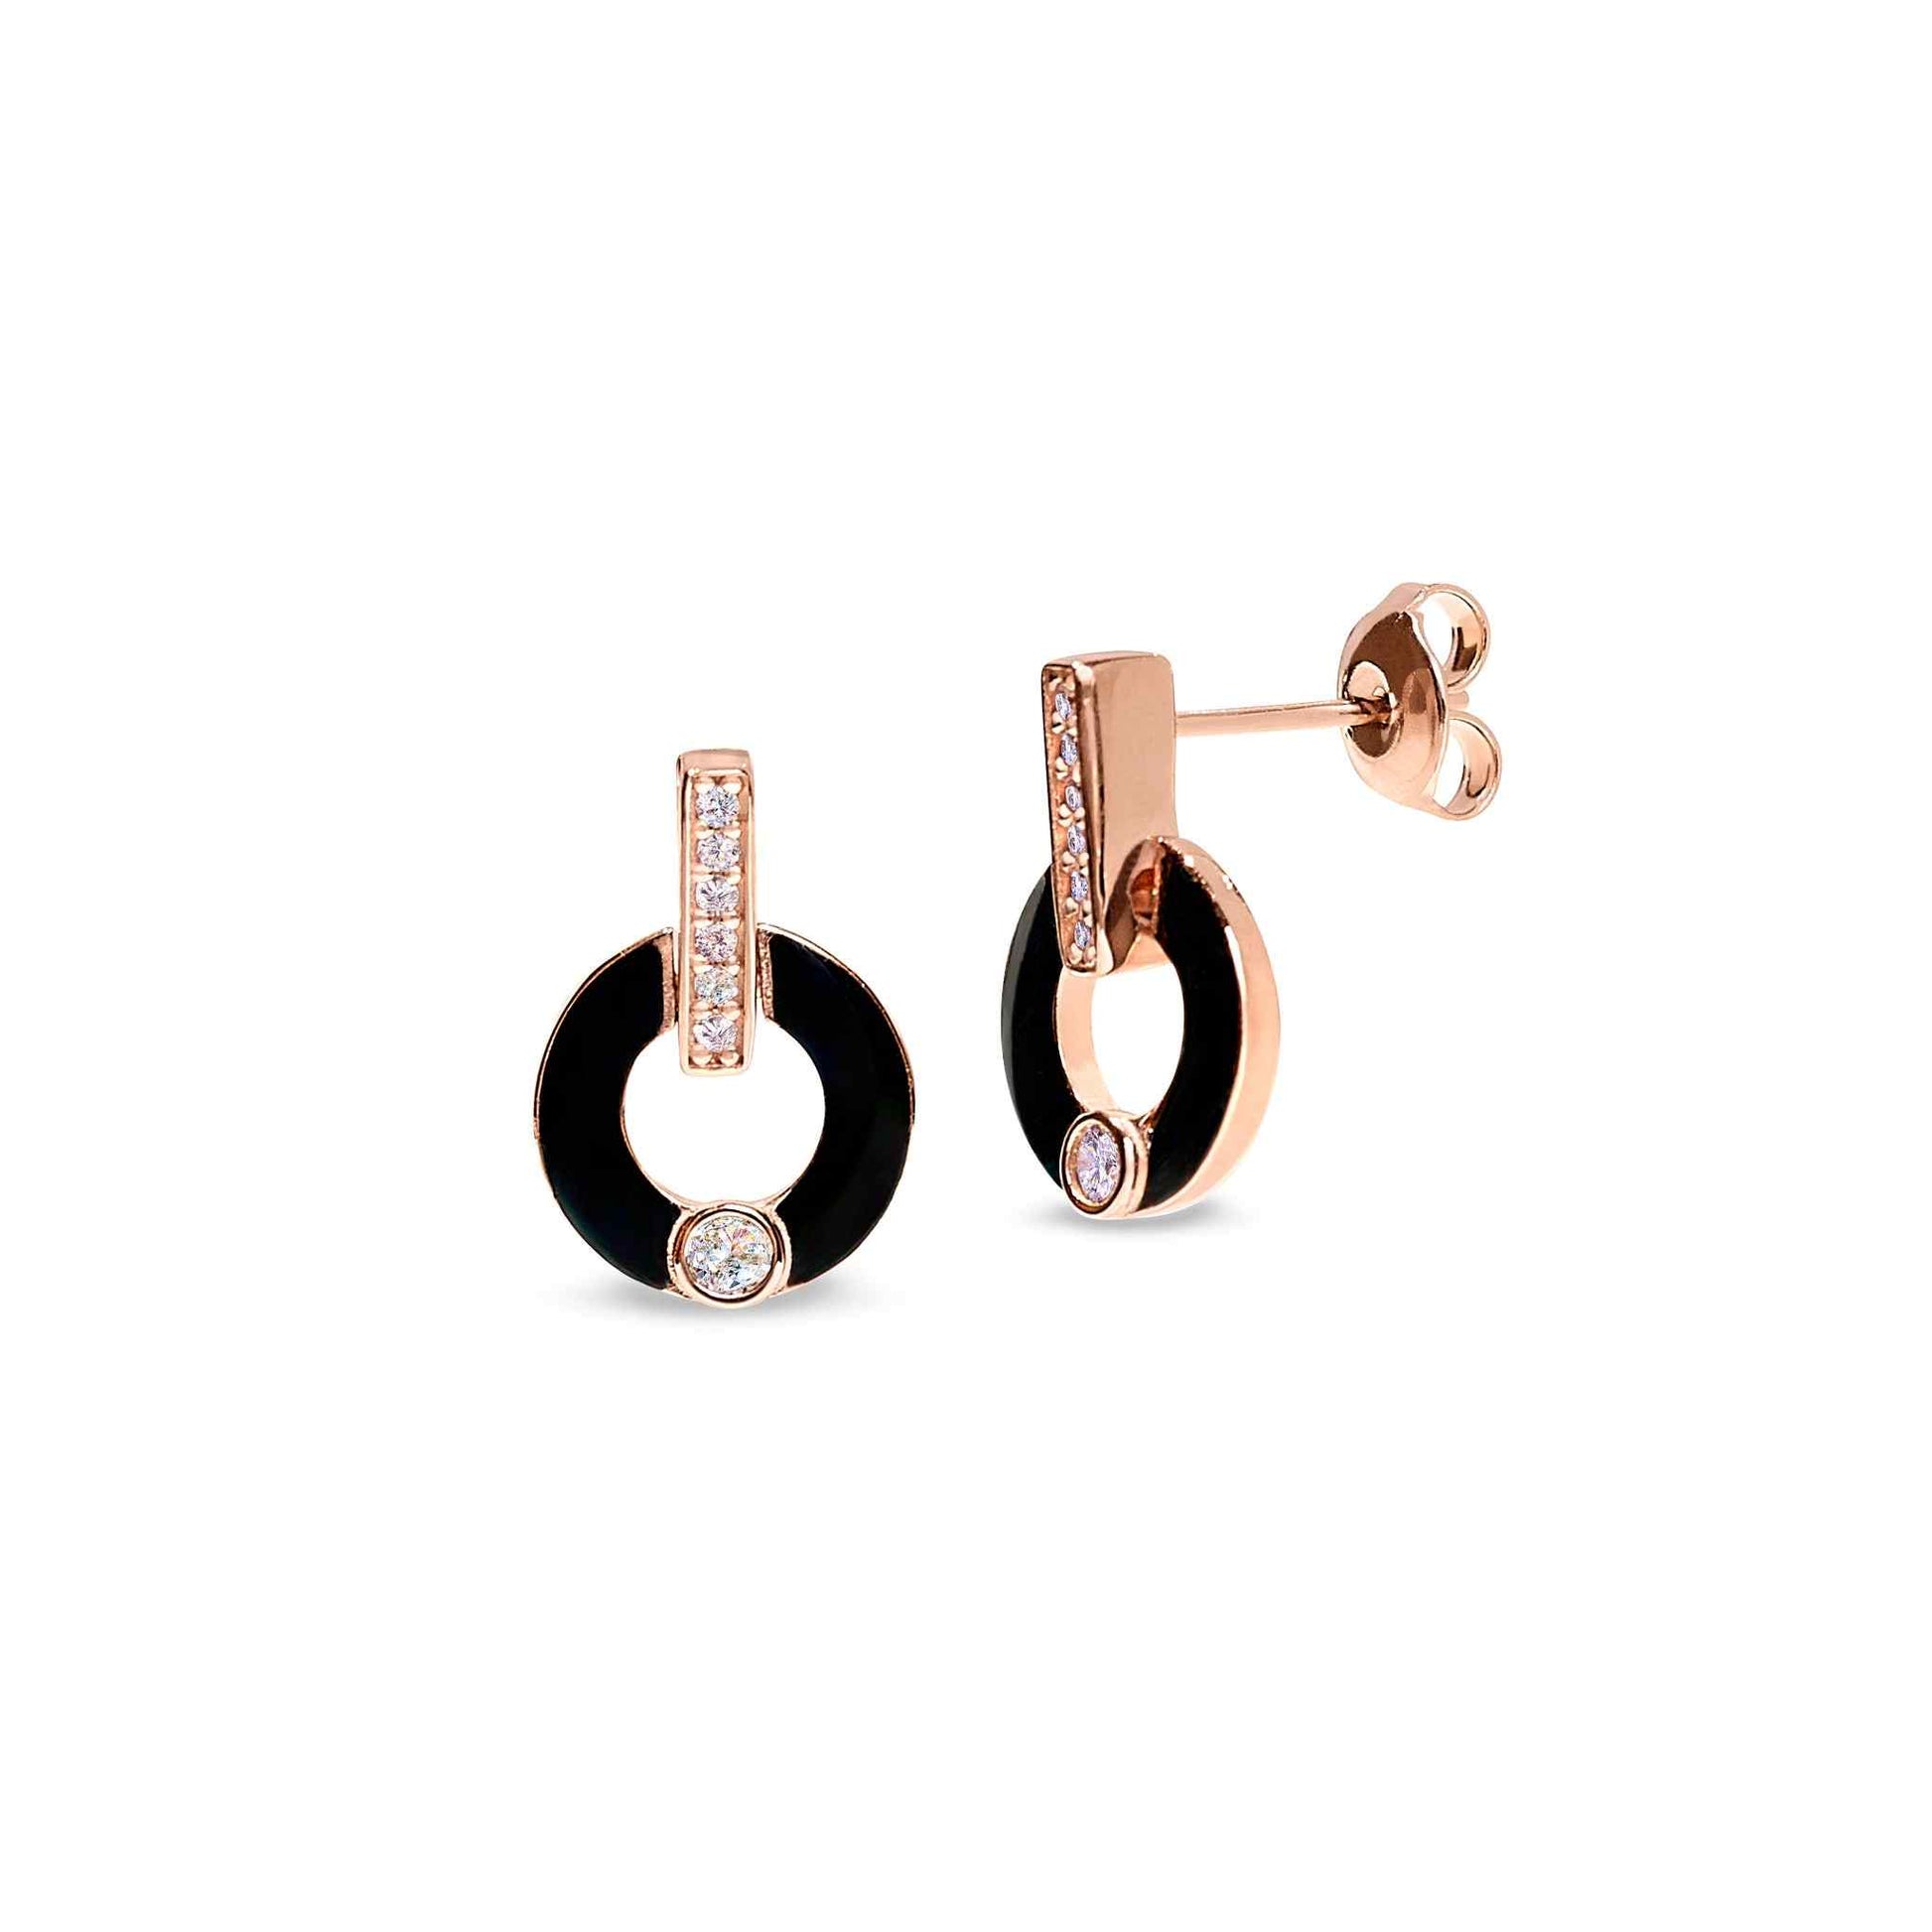 A sterling silver round drop earrings with black enamel and simulated diamonds displayed on a neutral white background.